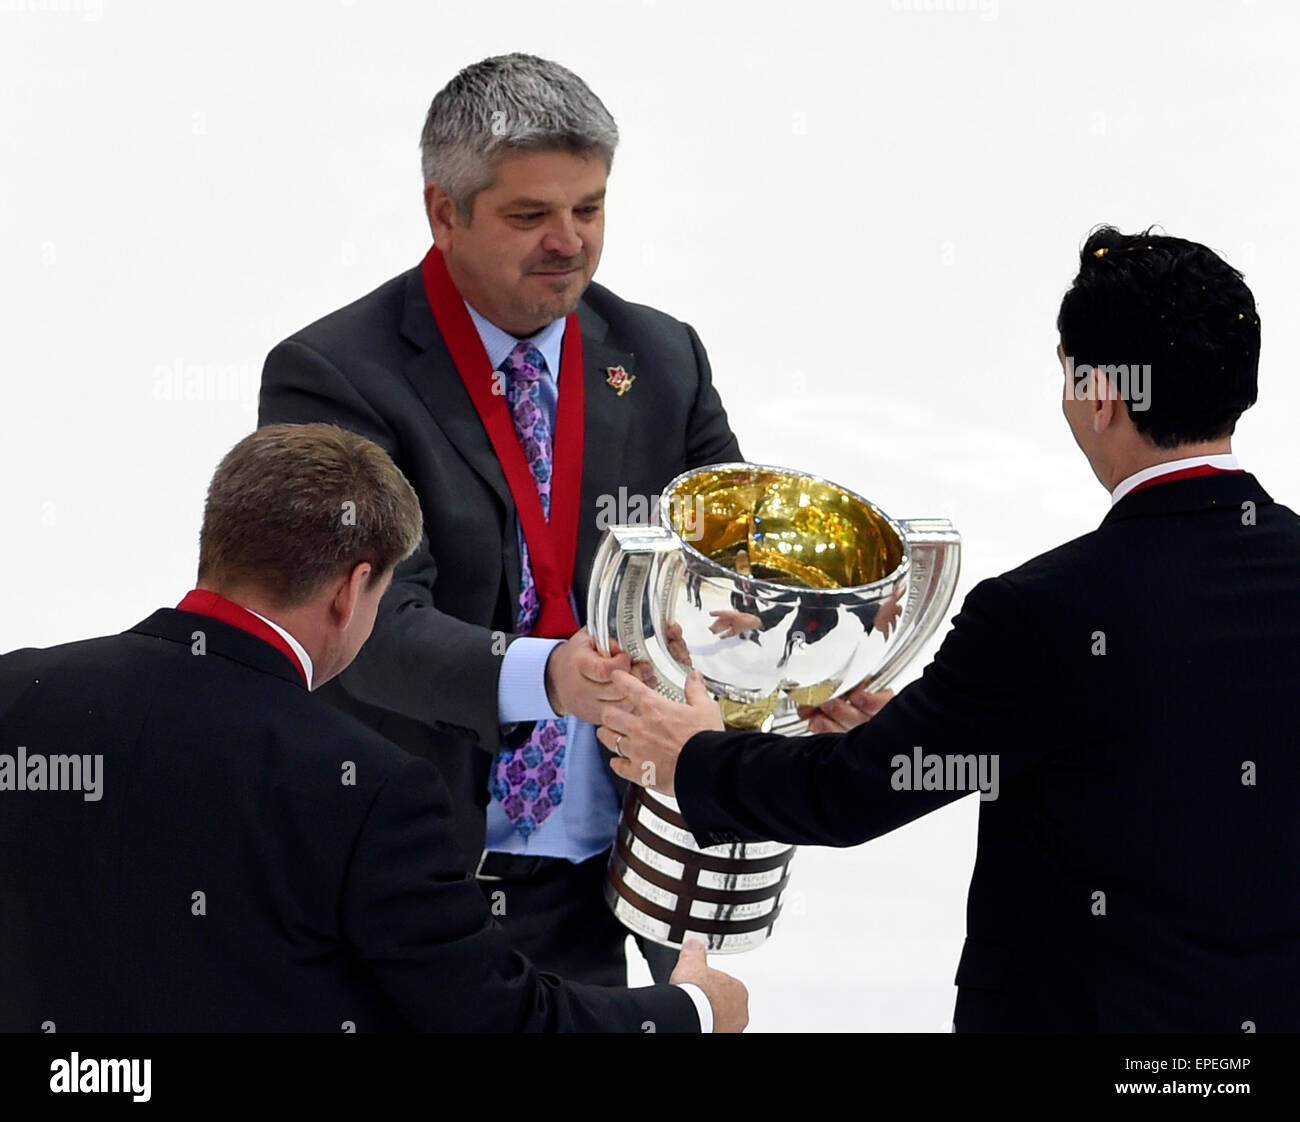 Canadian team head coach Todd McLellan receives the trophy after his team won the Ice Hockey World Championship final match Canada vs Russia in Prague, Czech Republic, May 17, 2015. (CTK Photo/Roman Vondrous) Stock Photo